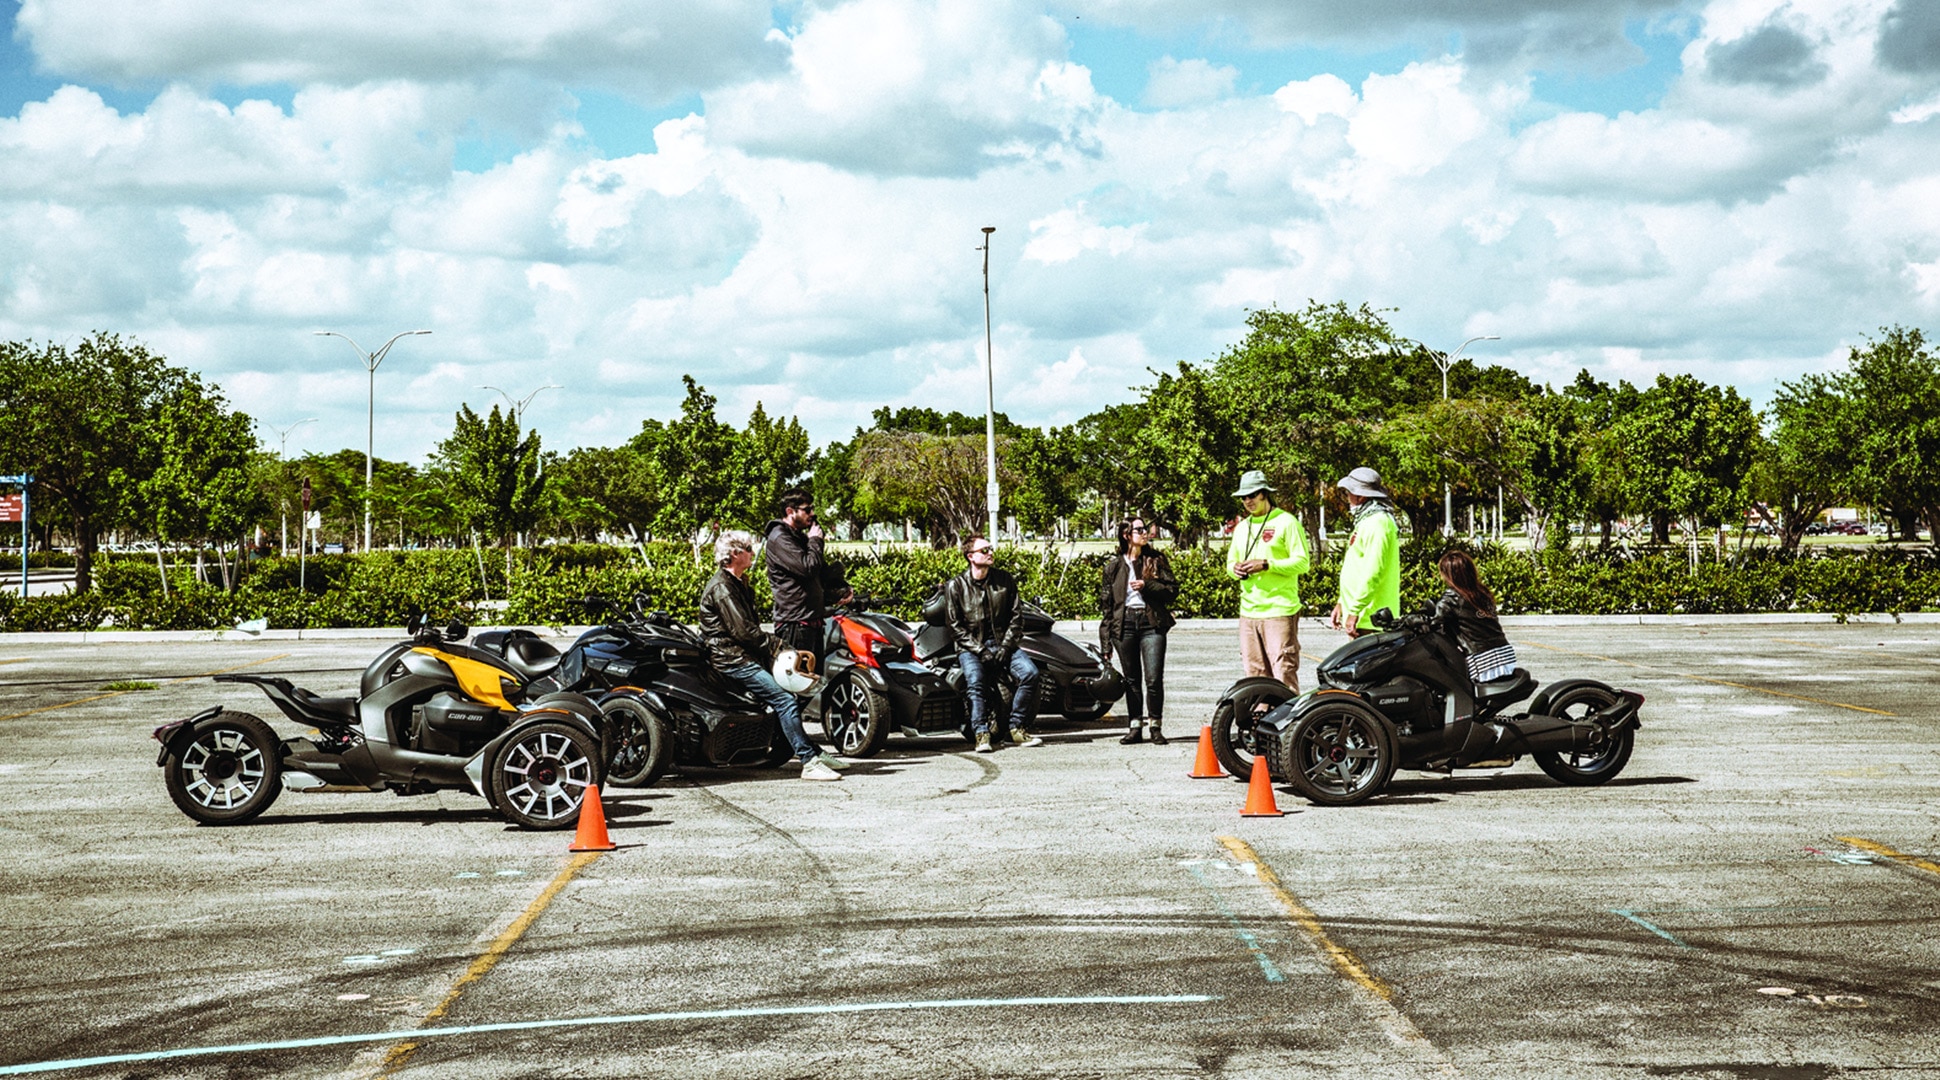 Group of riders in parking lot